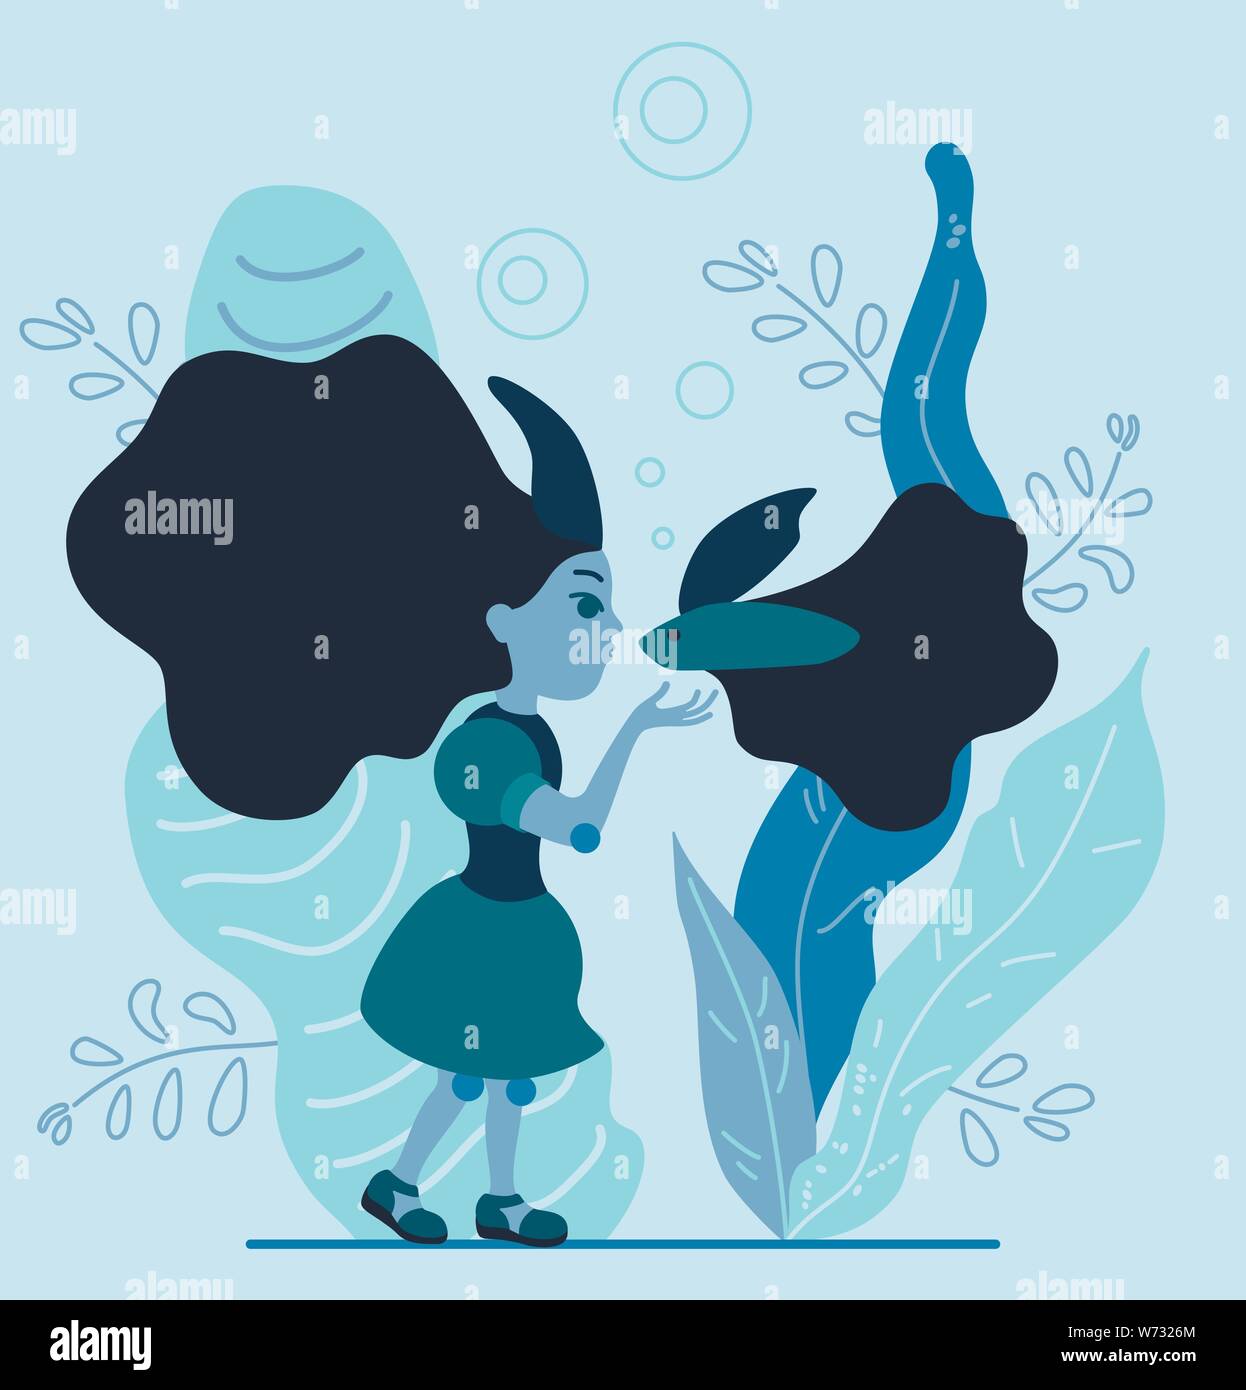 Vector flat style illustration. A girl under water with long wavy hair meets a fish. Sea floor in algae and with bubbles. Stock Vector